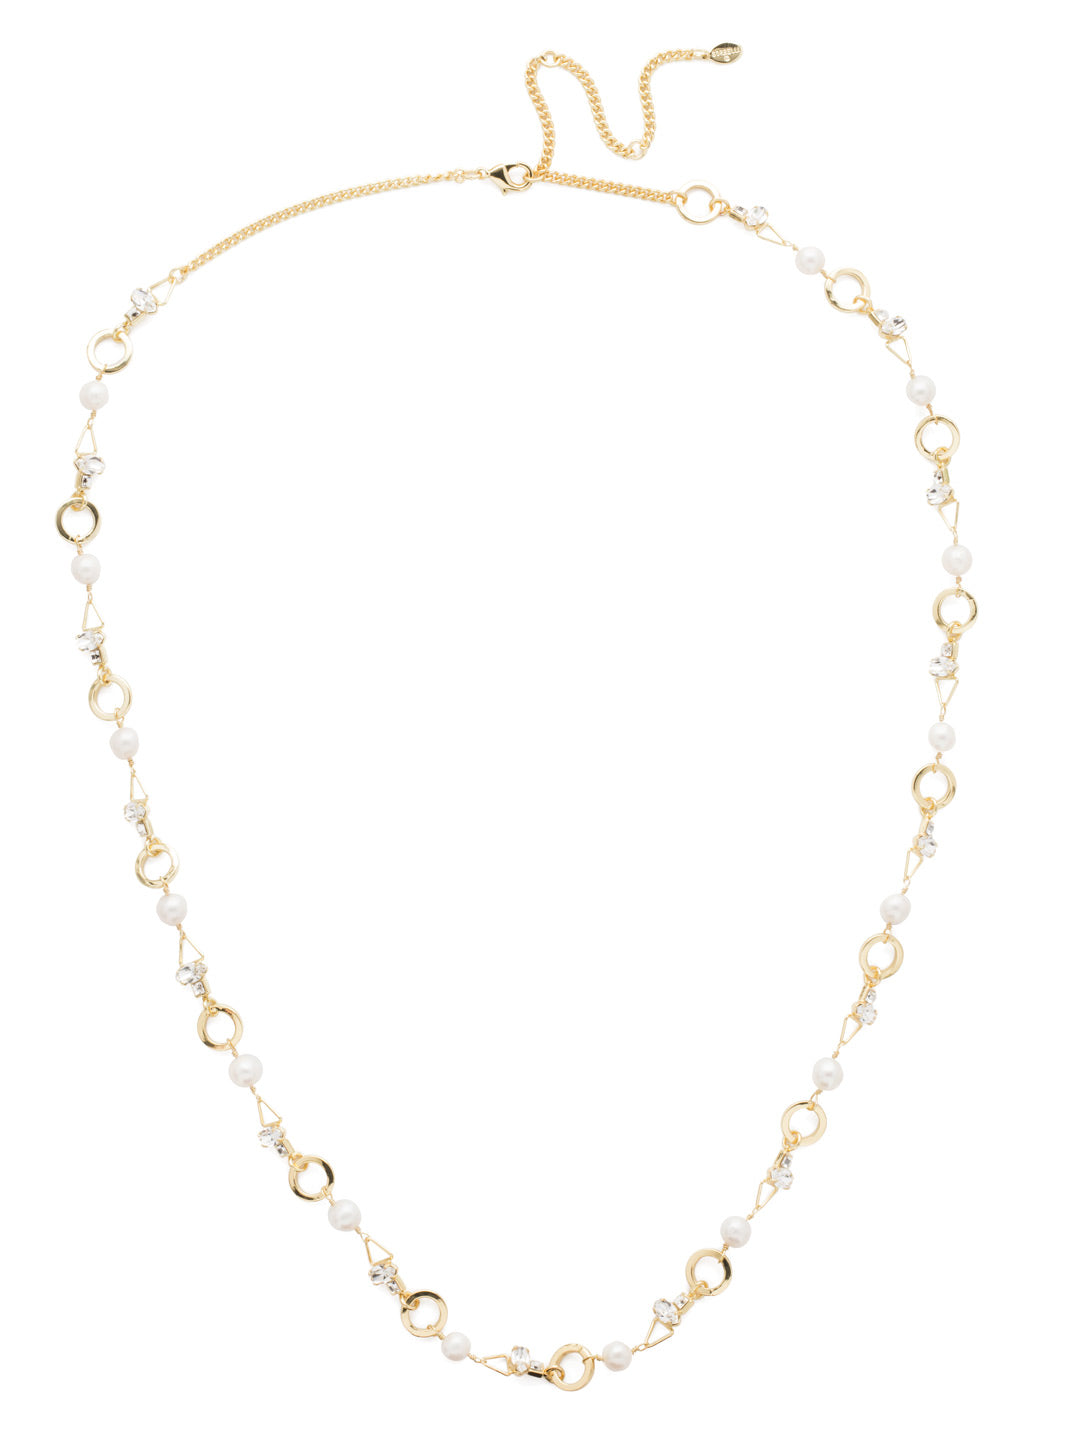 Hadley Long Necklace - NEB16BGMDP - <p>A combination of pearls, petite crystals and charming geometric shapes create this modern form long strand necklace. Wear the Hadley with complimenting strands for a signature Sorrelli layered look. From Sorrelli's Modern Pearl collection in our Bright Gold-tone finish.</p>